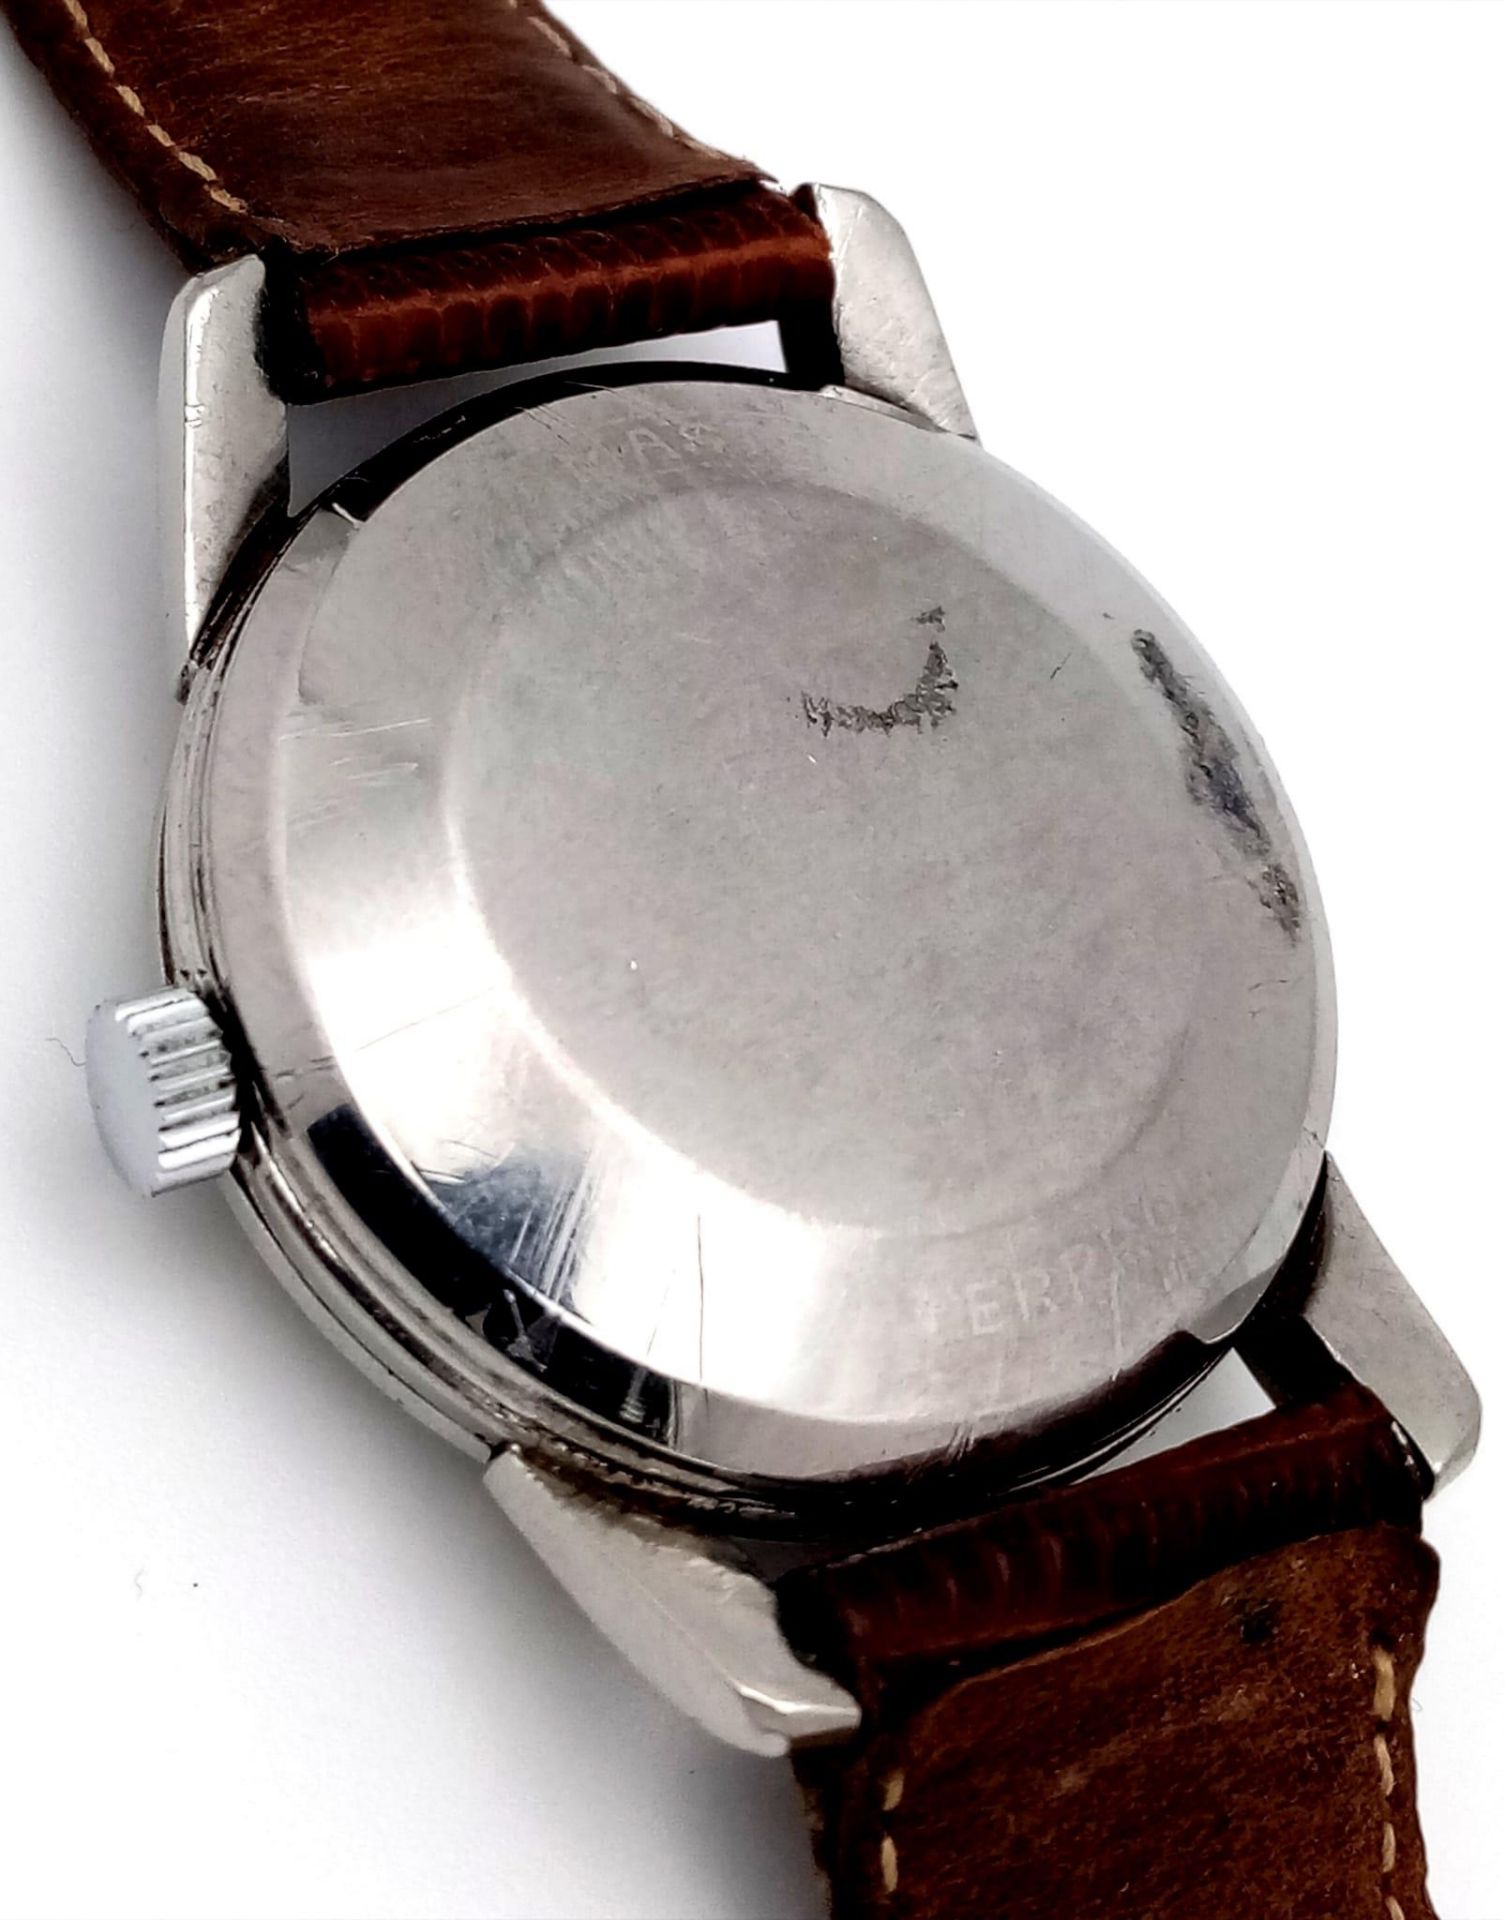 A Vintage Omega Seamaster Calendar Gents Watch. Brown leather strap. Stainless steel case - 33mm. - Image 8 of 8